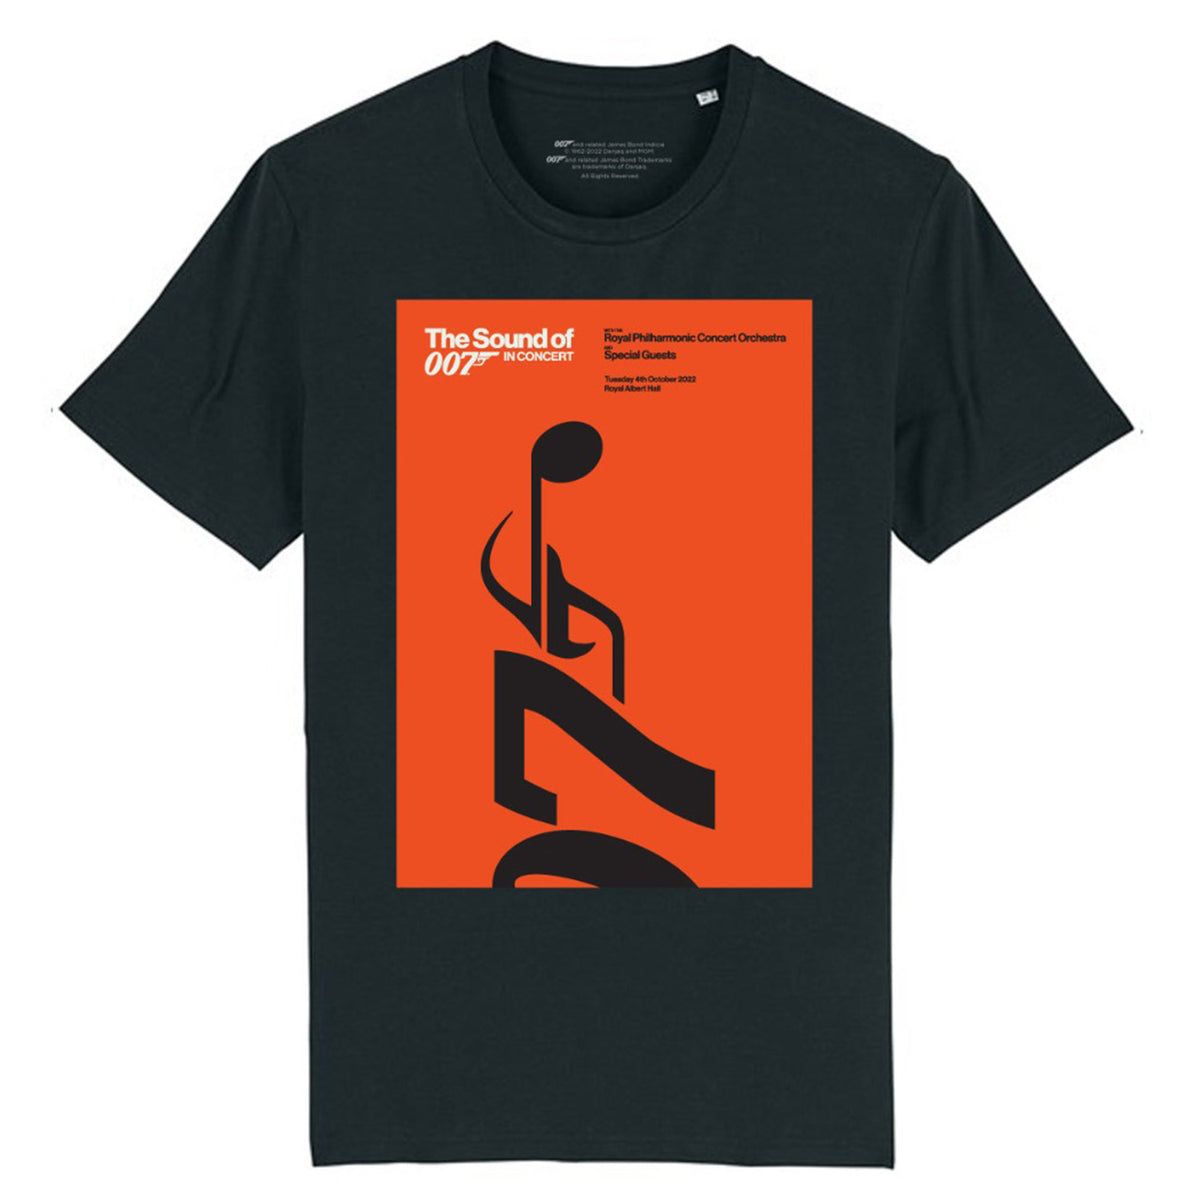 James Bond The Sound of 007 In Concert Black T-Shirt - Limited Edition